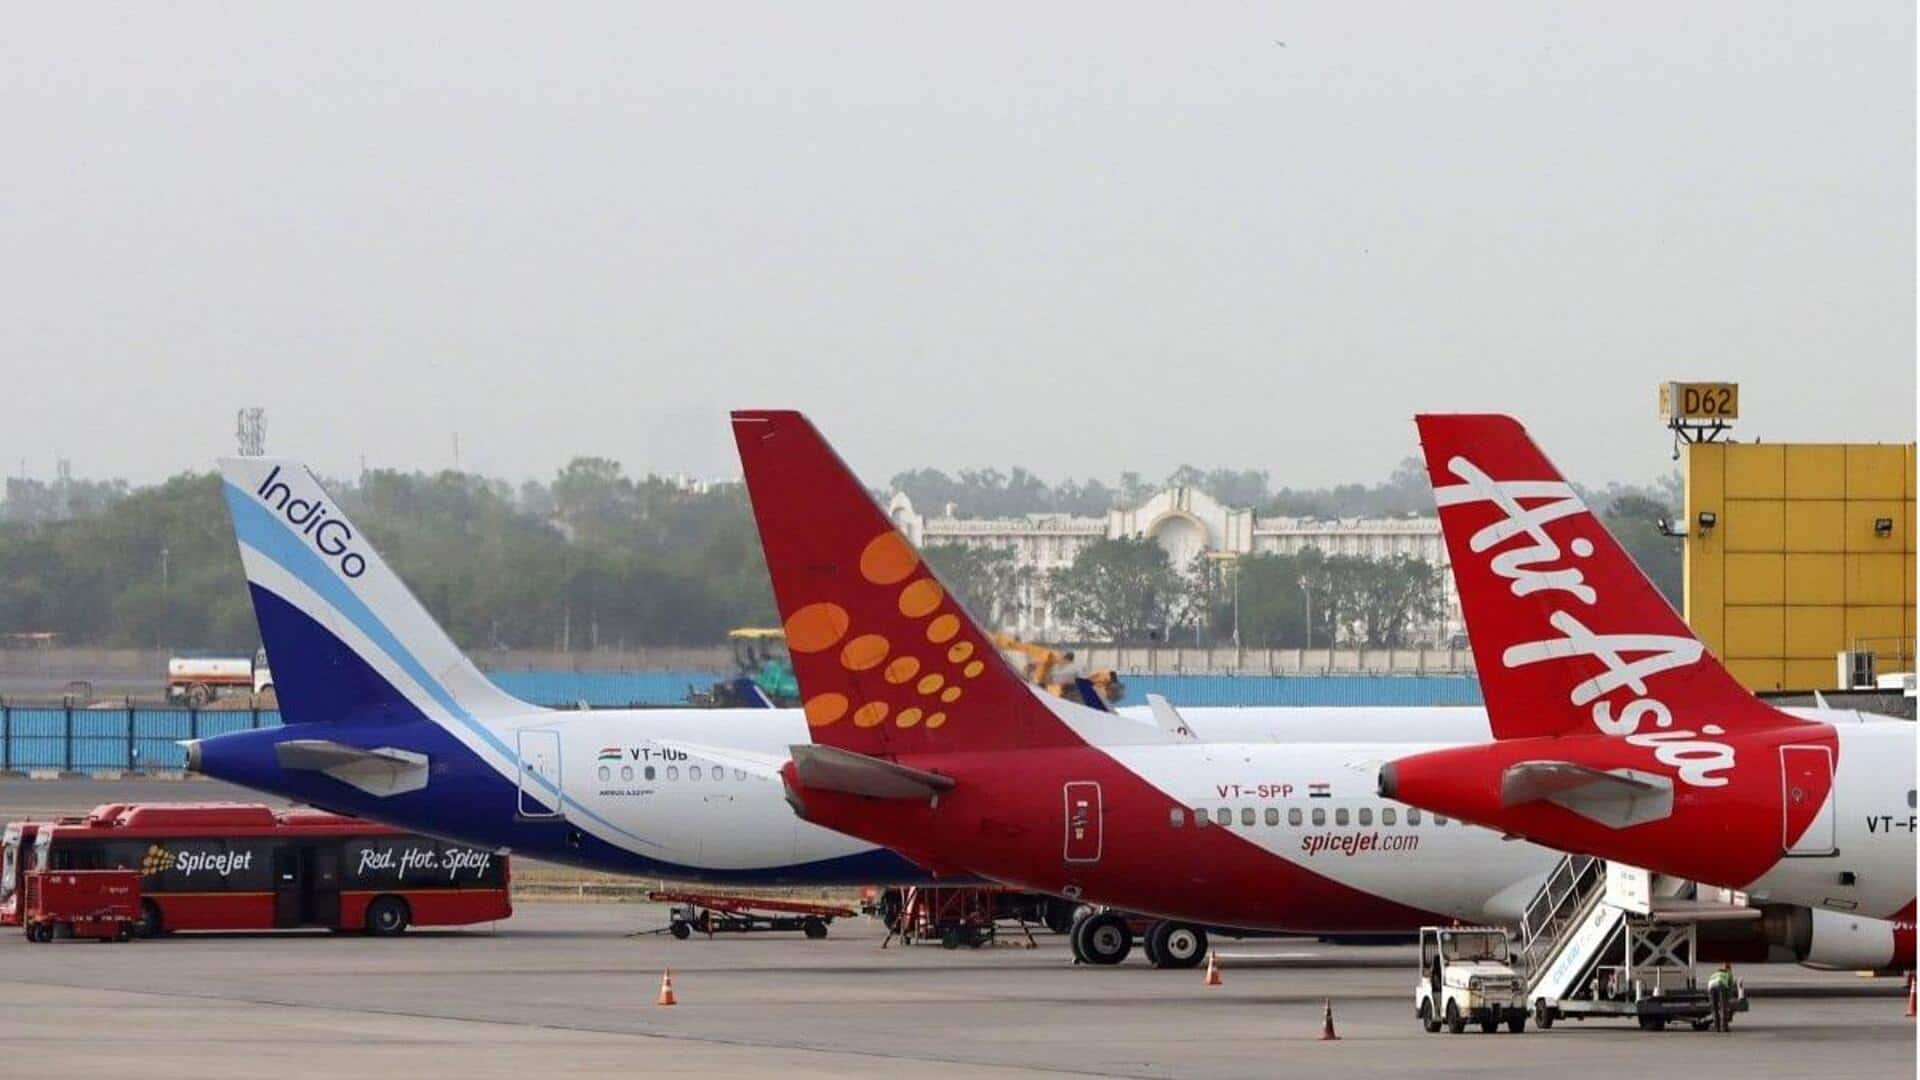 Air travel to get costlier as jet fuel prices soar